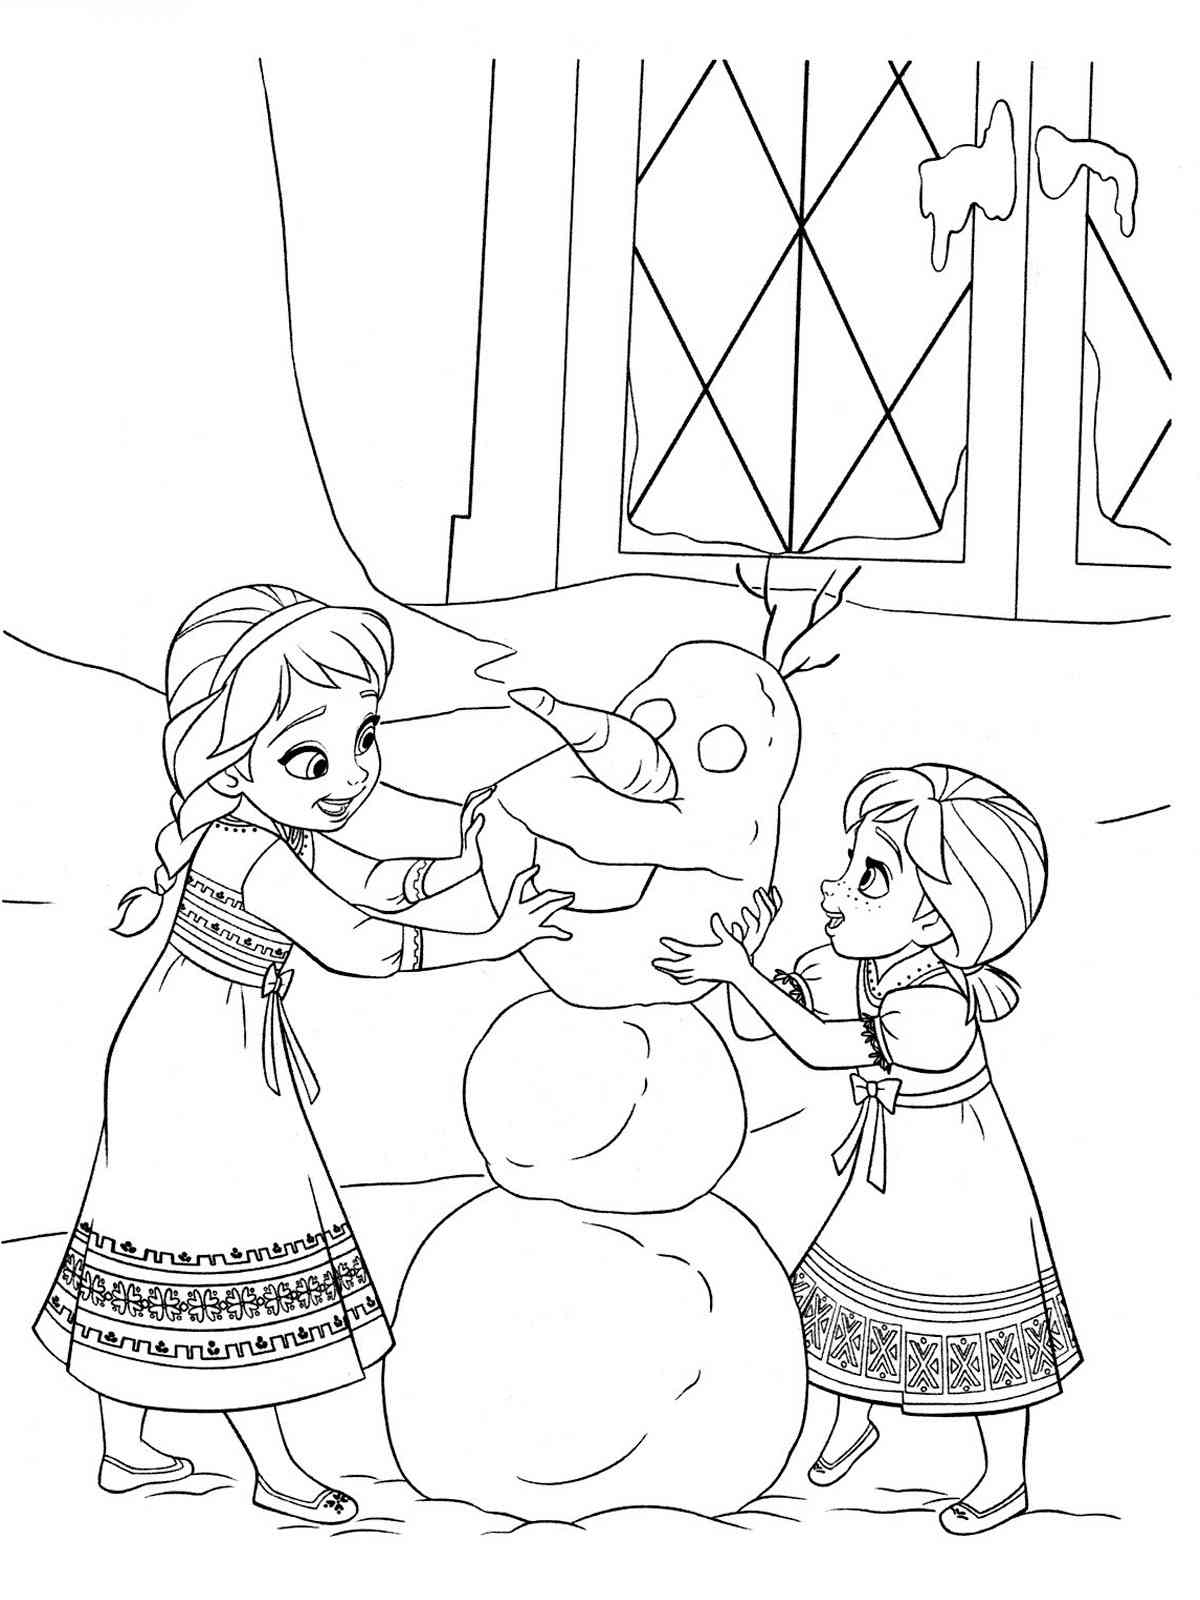 Elsa and Anna 11 coloring page